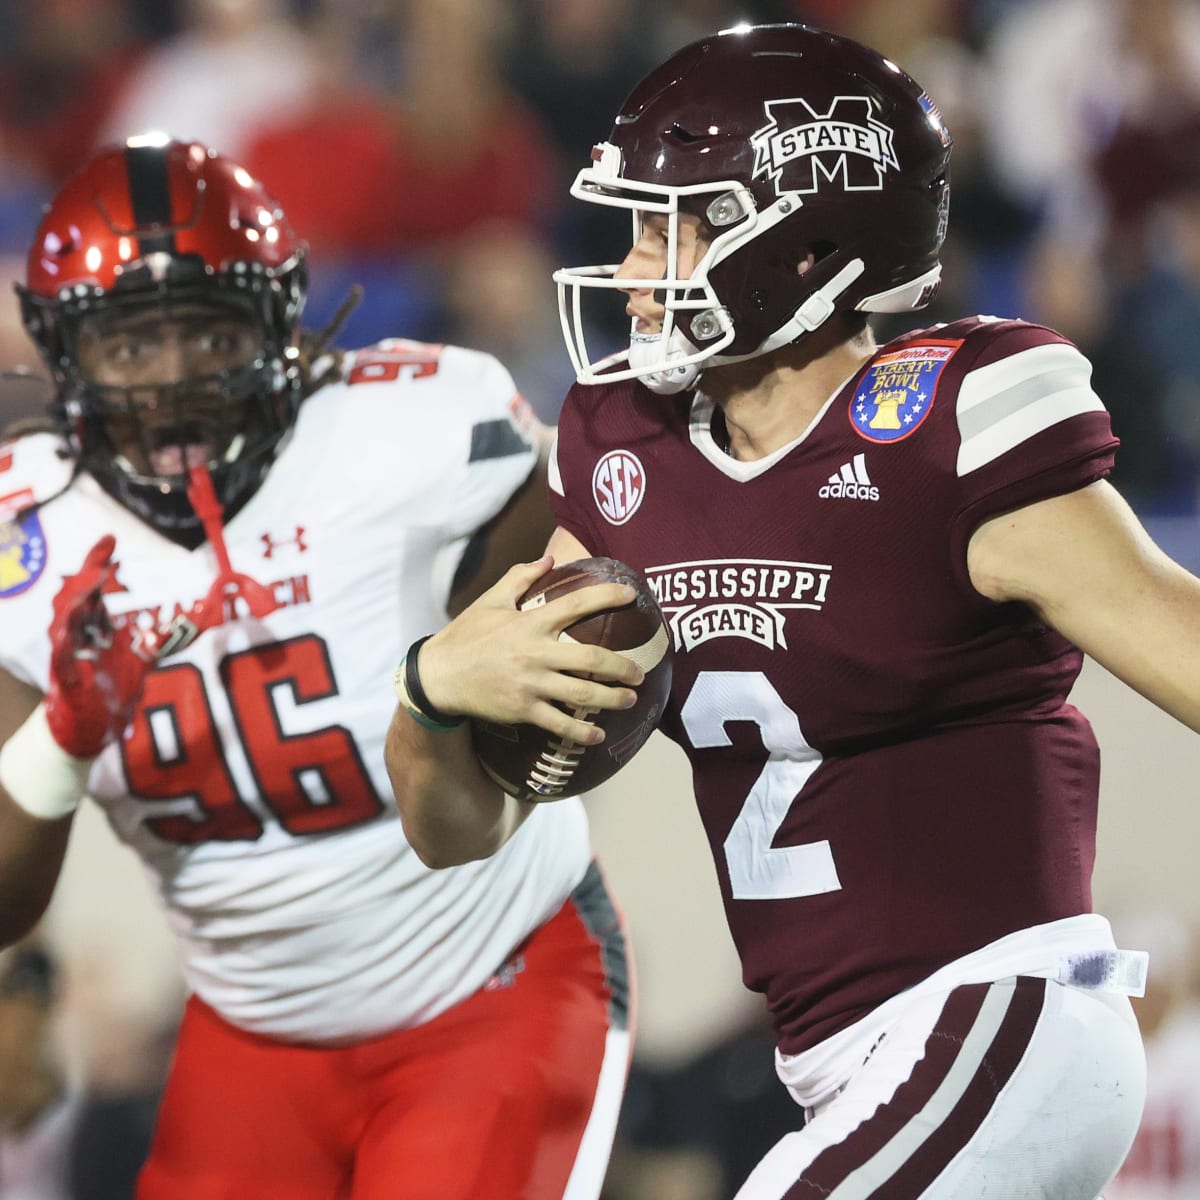 Mississippi State Schedule 2022 Mississippi State Football: Bulldogs Face Nation's Toughest Schedule In 2022  - Sports Illustrated Mississippi State Football, Basketball, Recruiting,  And More